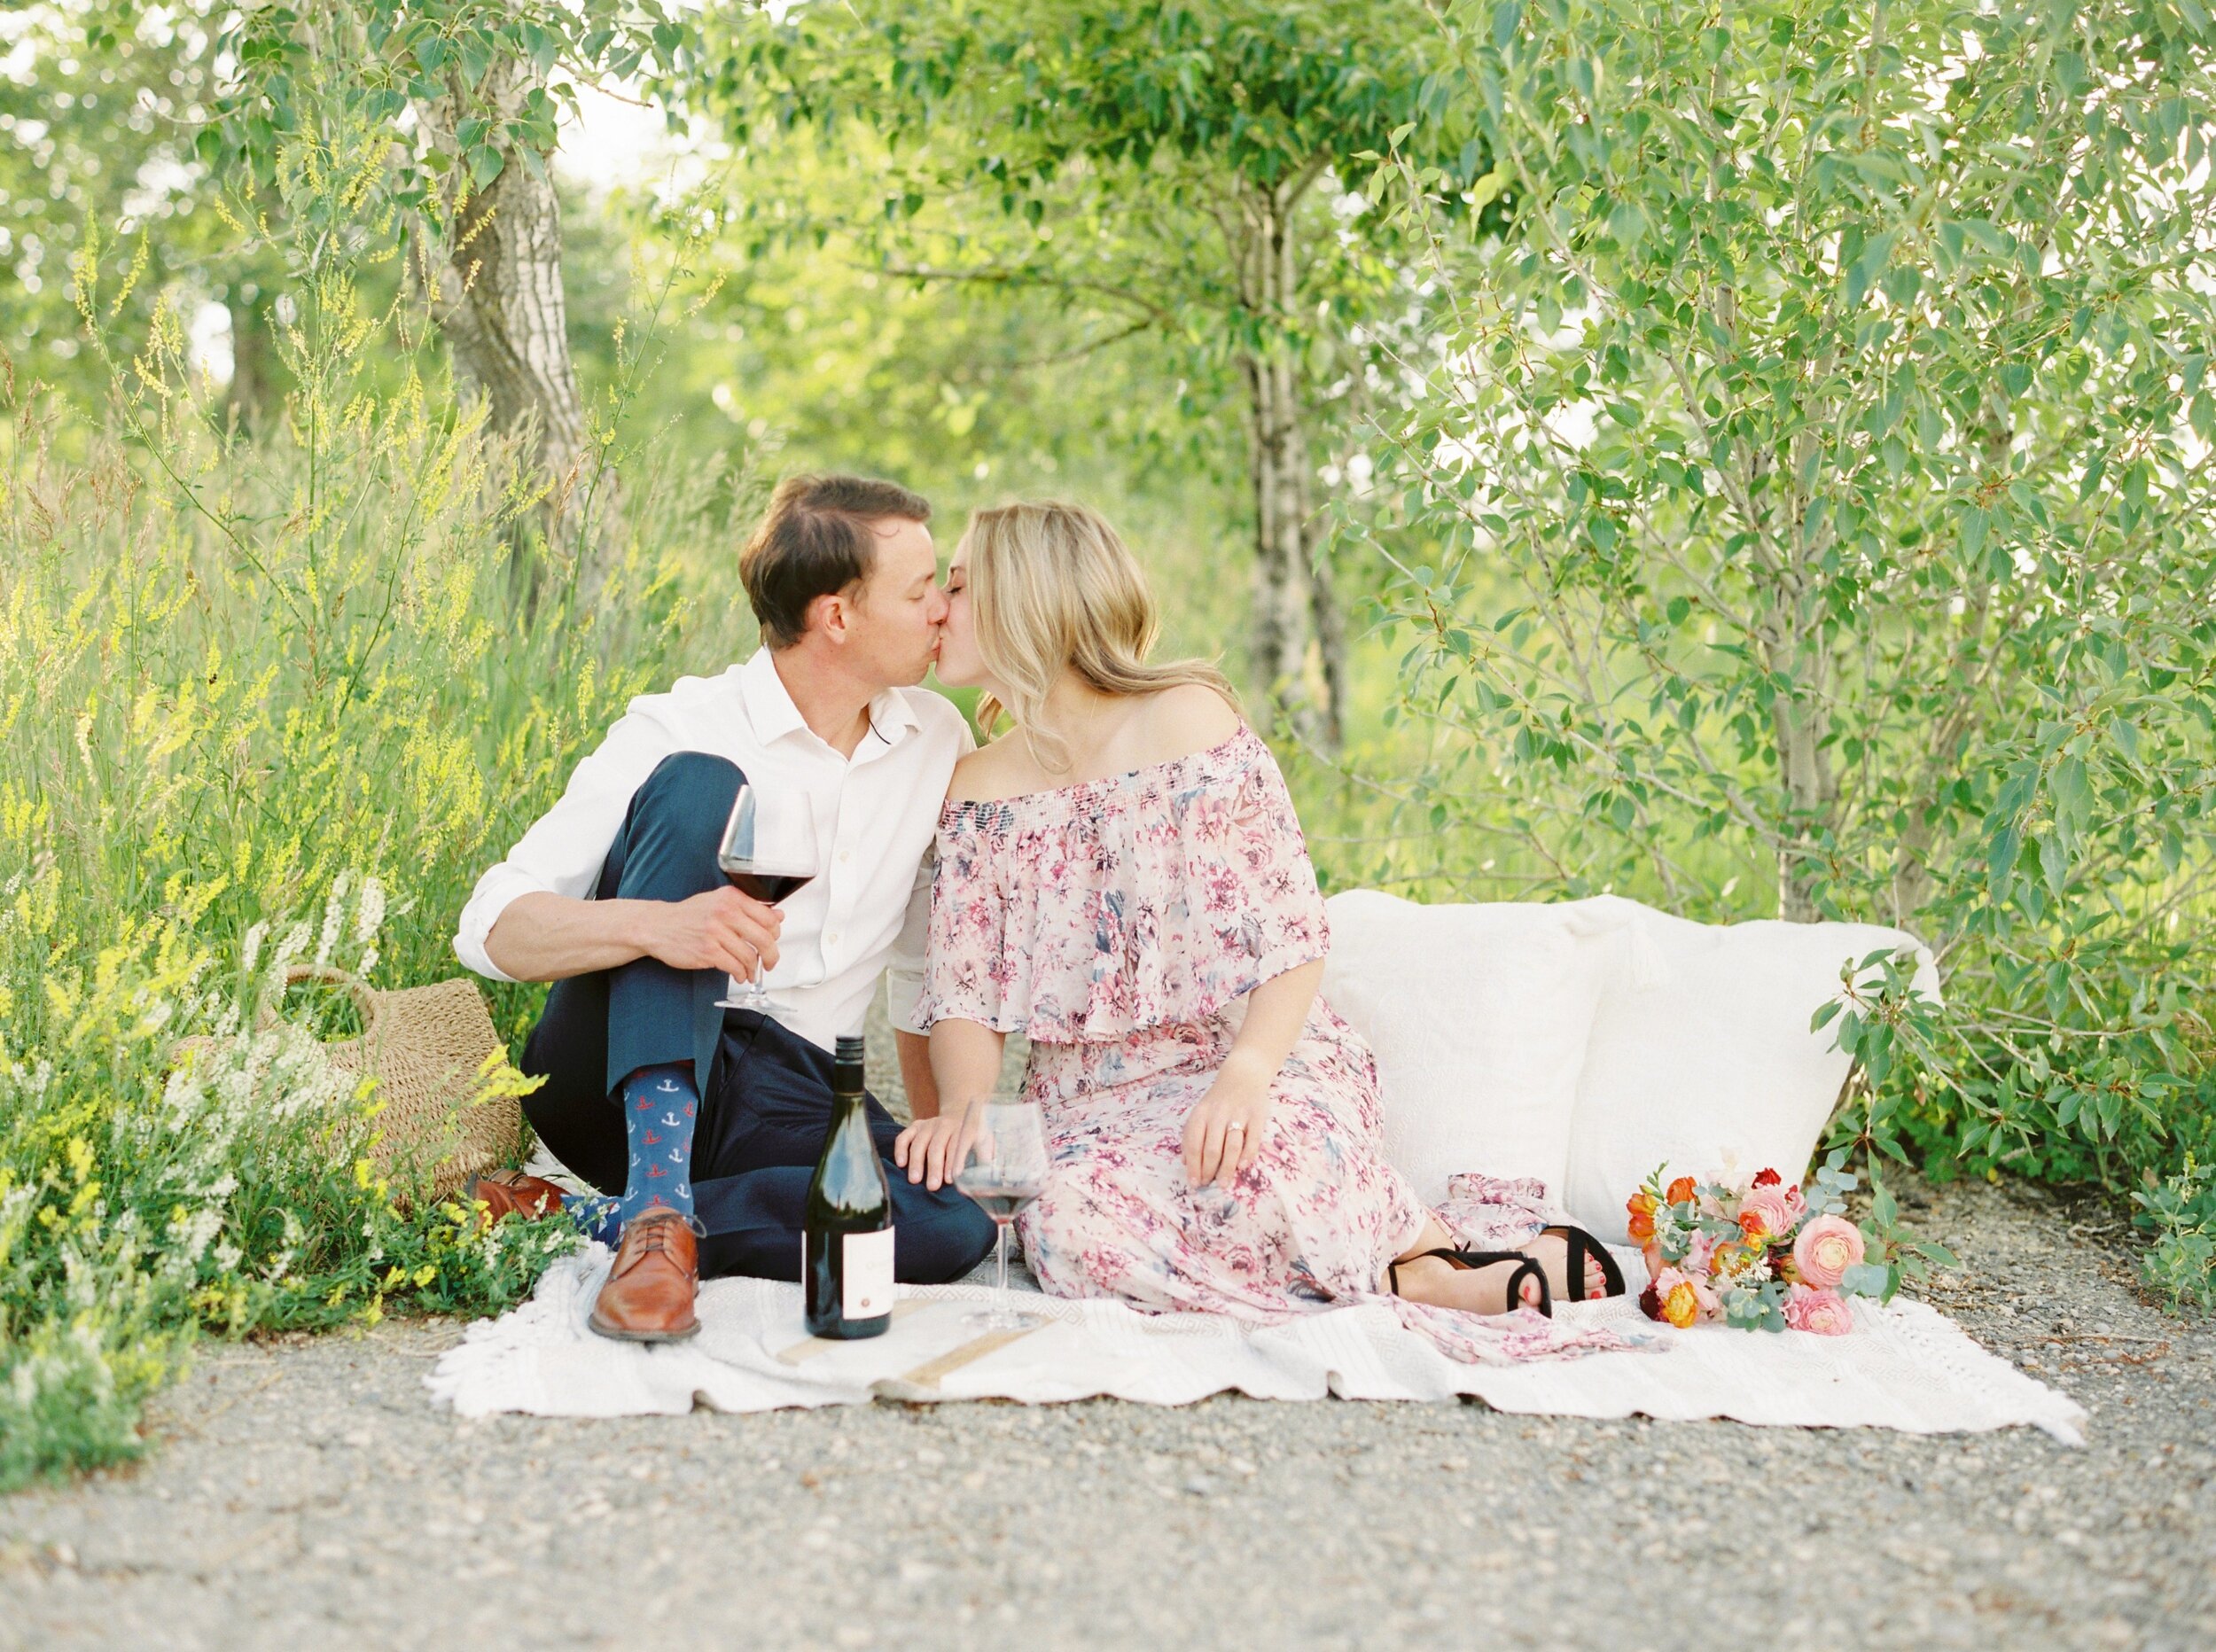  picnic with wine engagement session | nose hill park calgary summer engagement session | calgary fine art film wedding & engagement photographer justine milton 